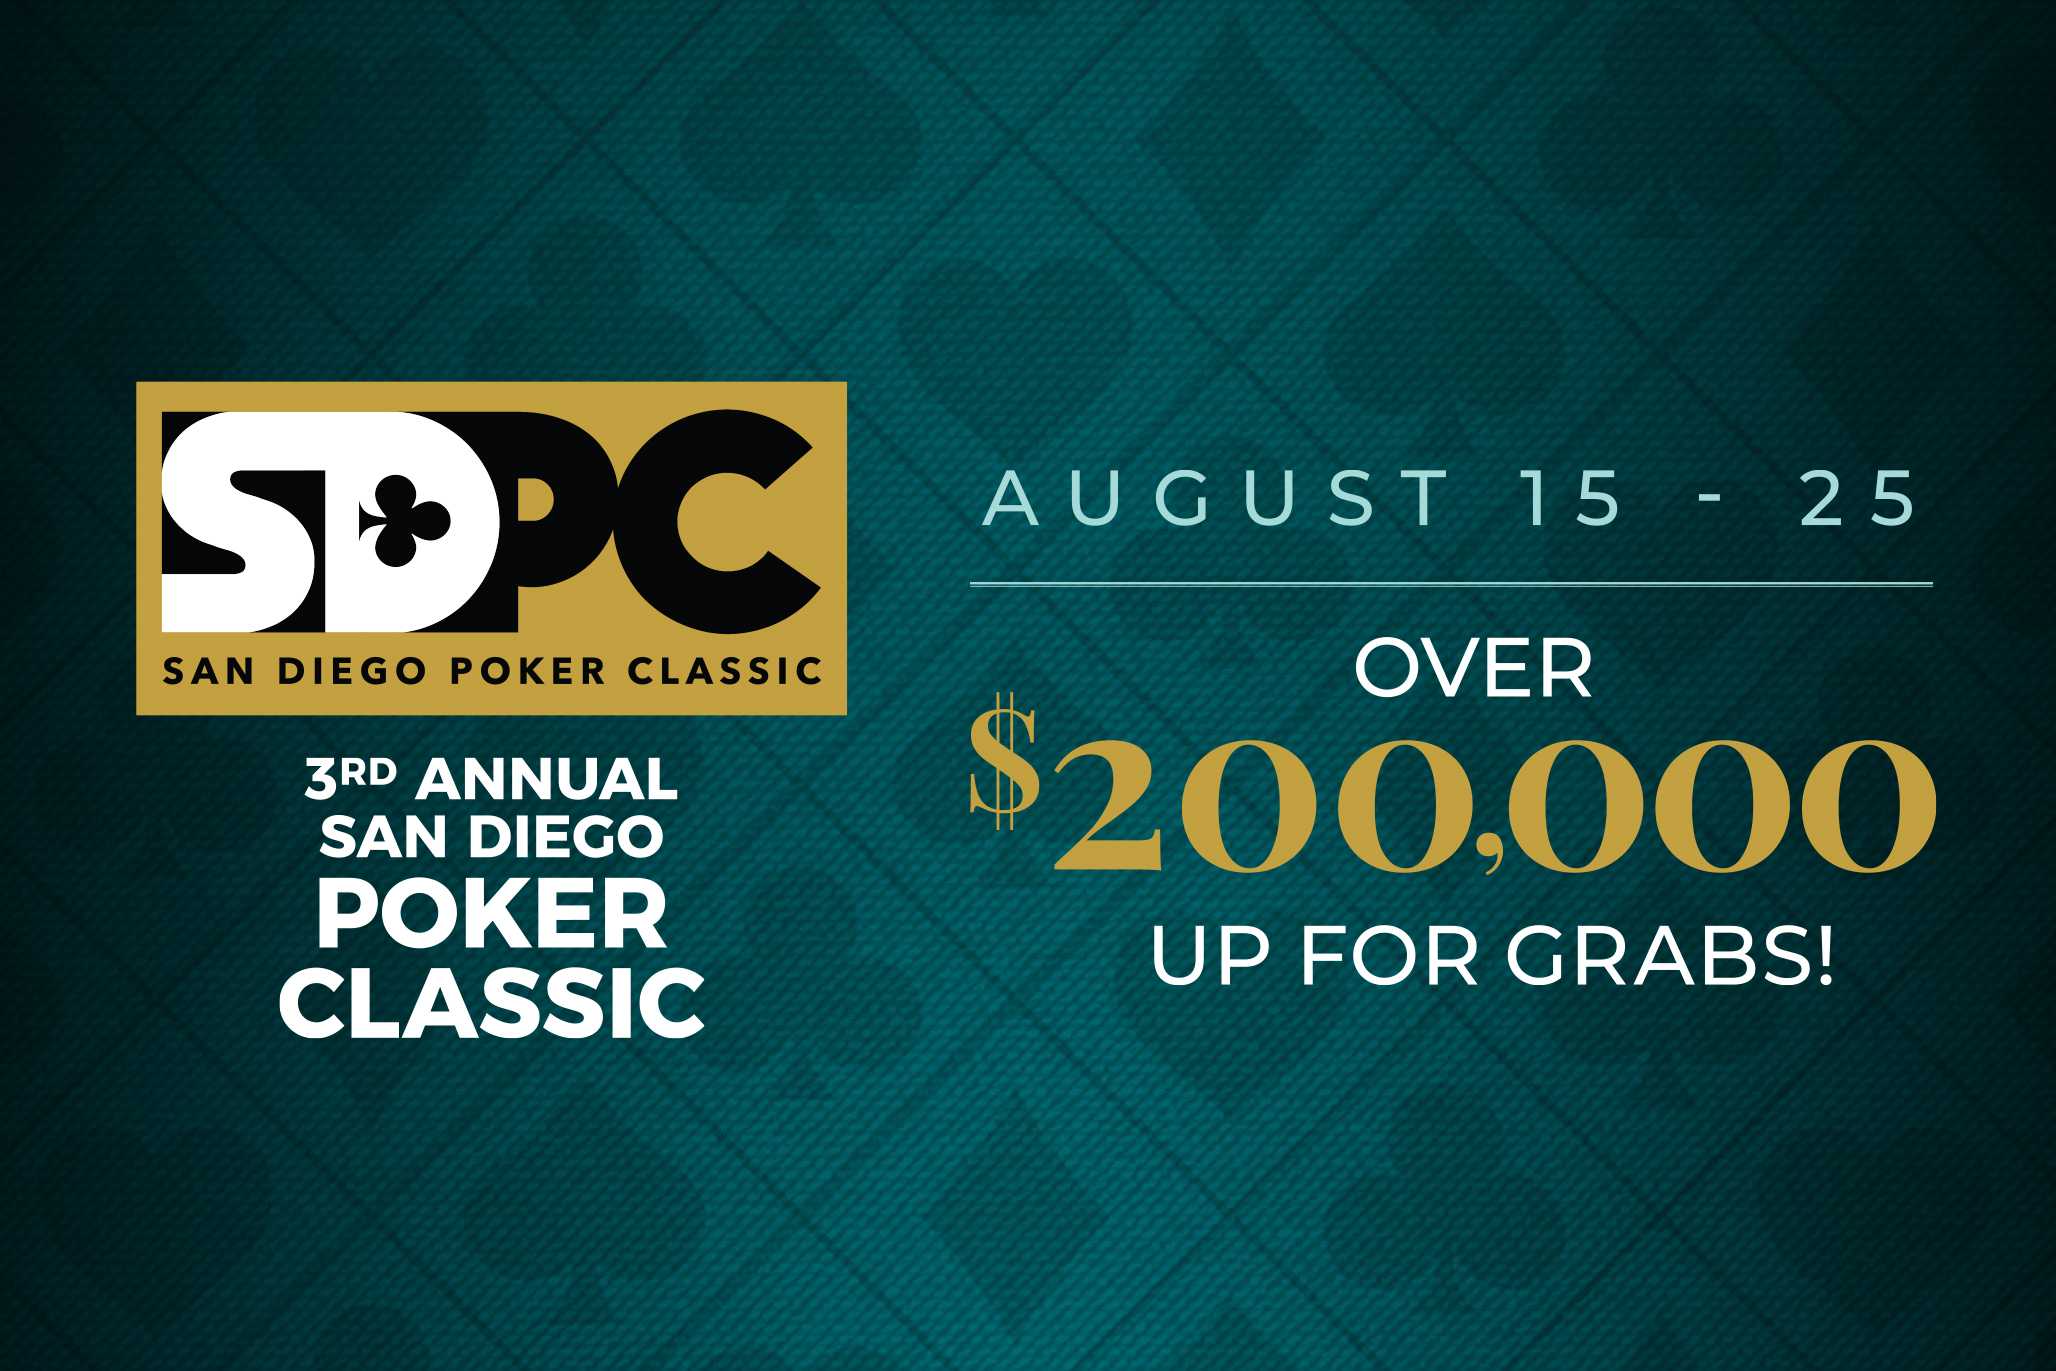 SDPC San Diego Poker Classic 3rd Annual San Diego Poker Classic August 14-25; Over $200,000 up for grabs!